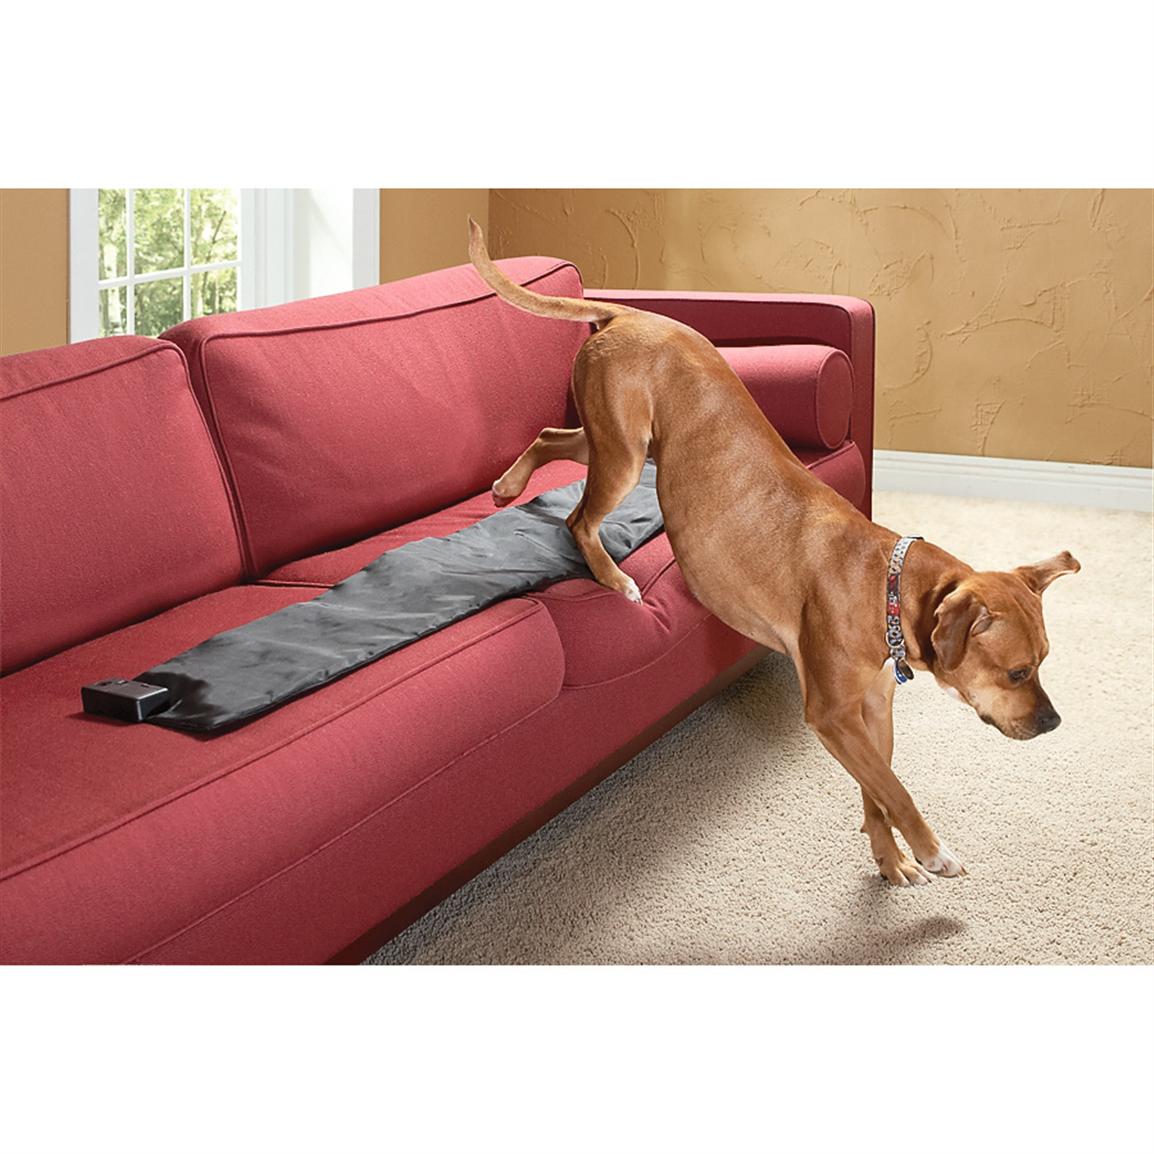 Stay Off Furniture Pet Mat 208785 Training Equipment At